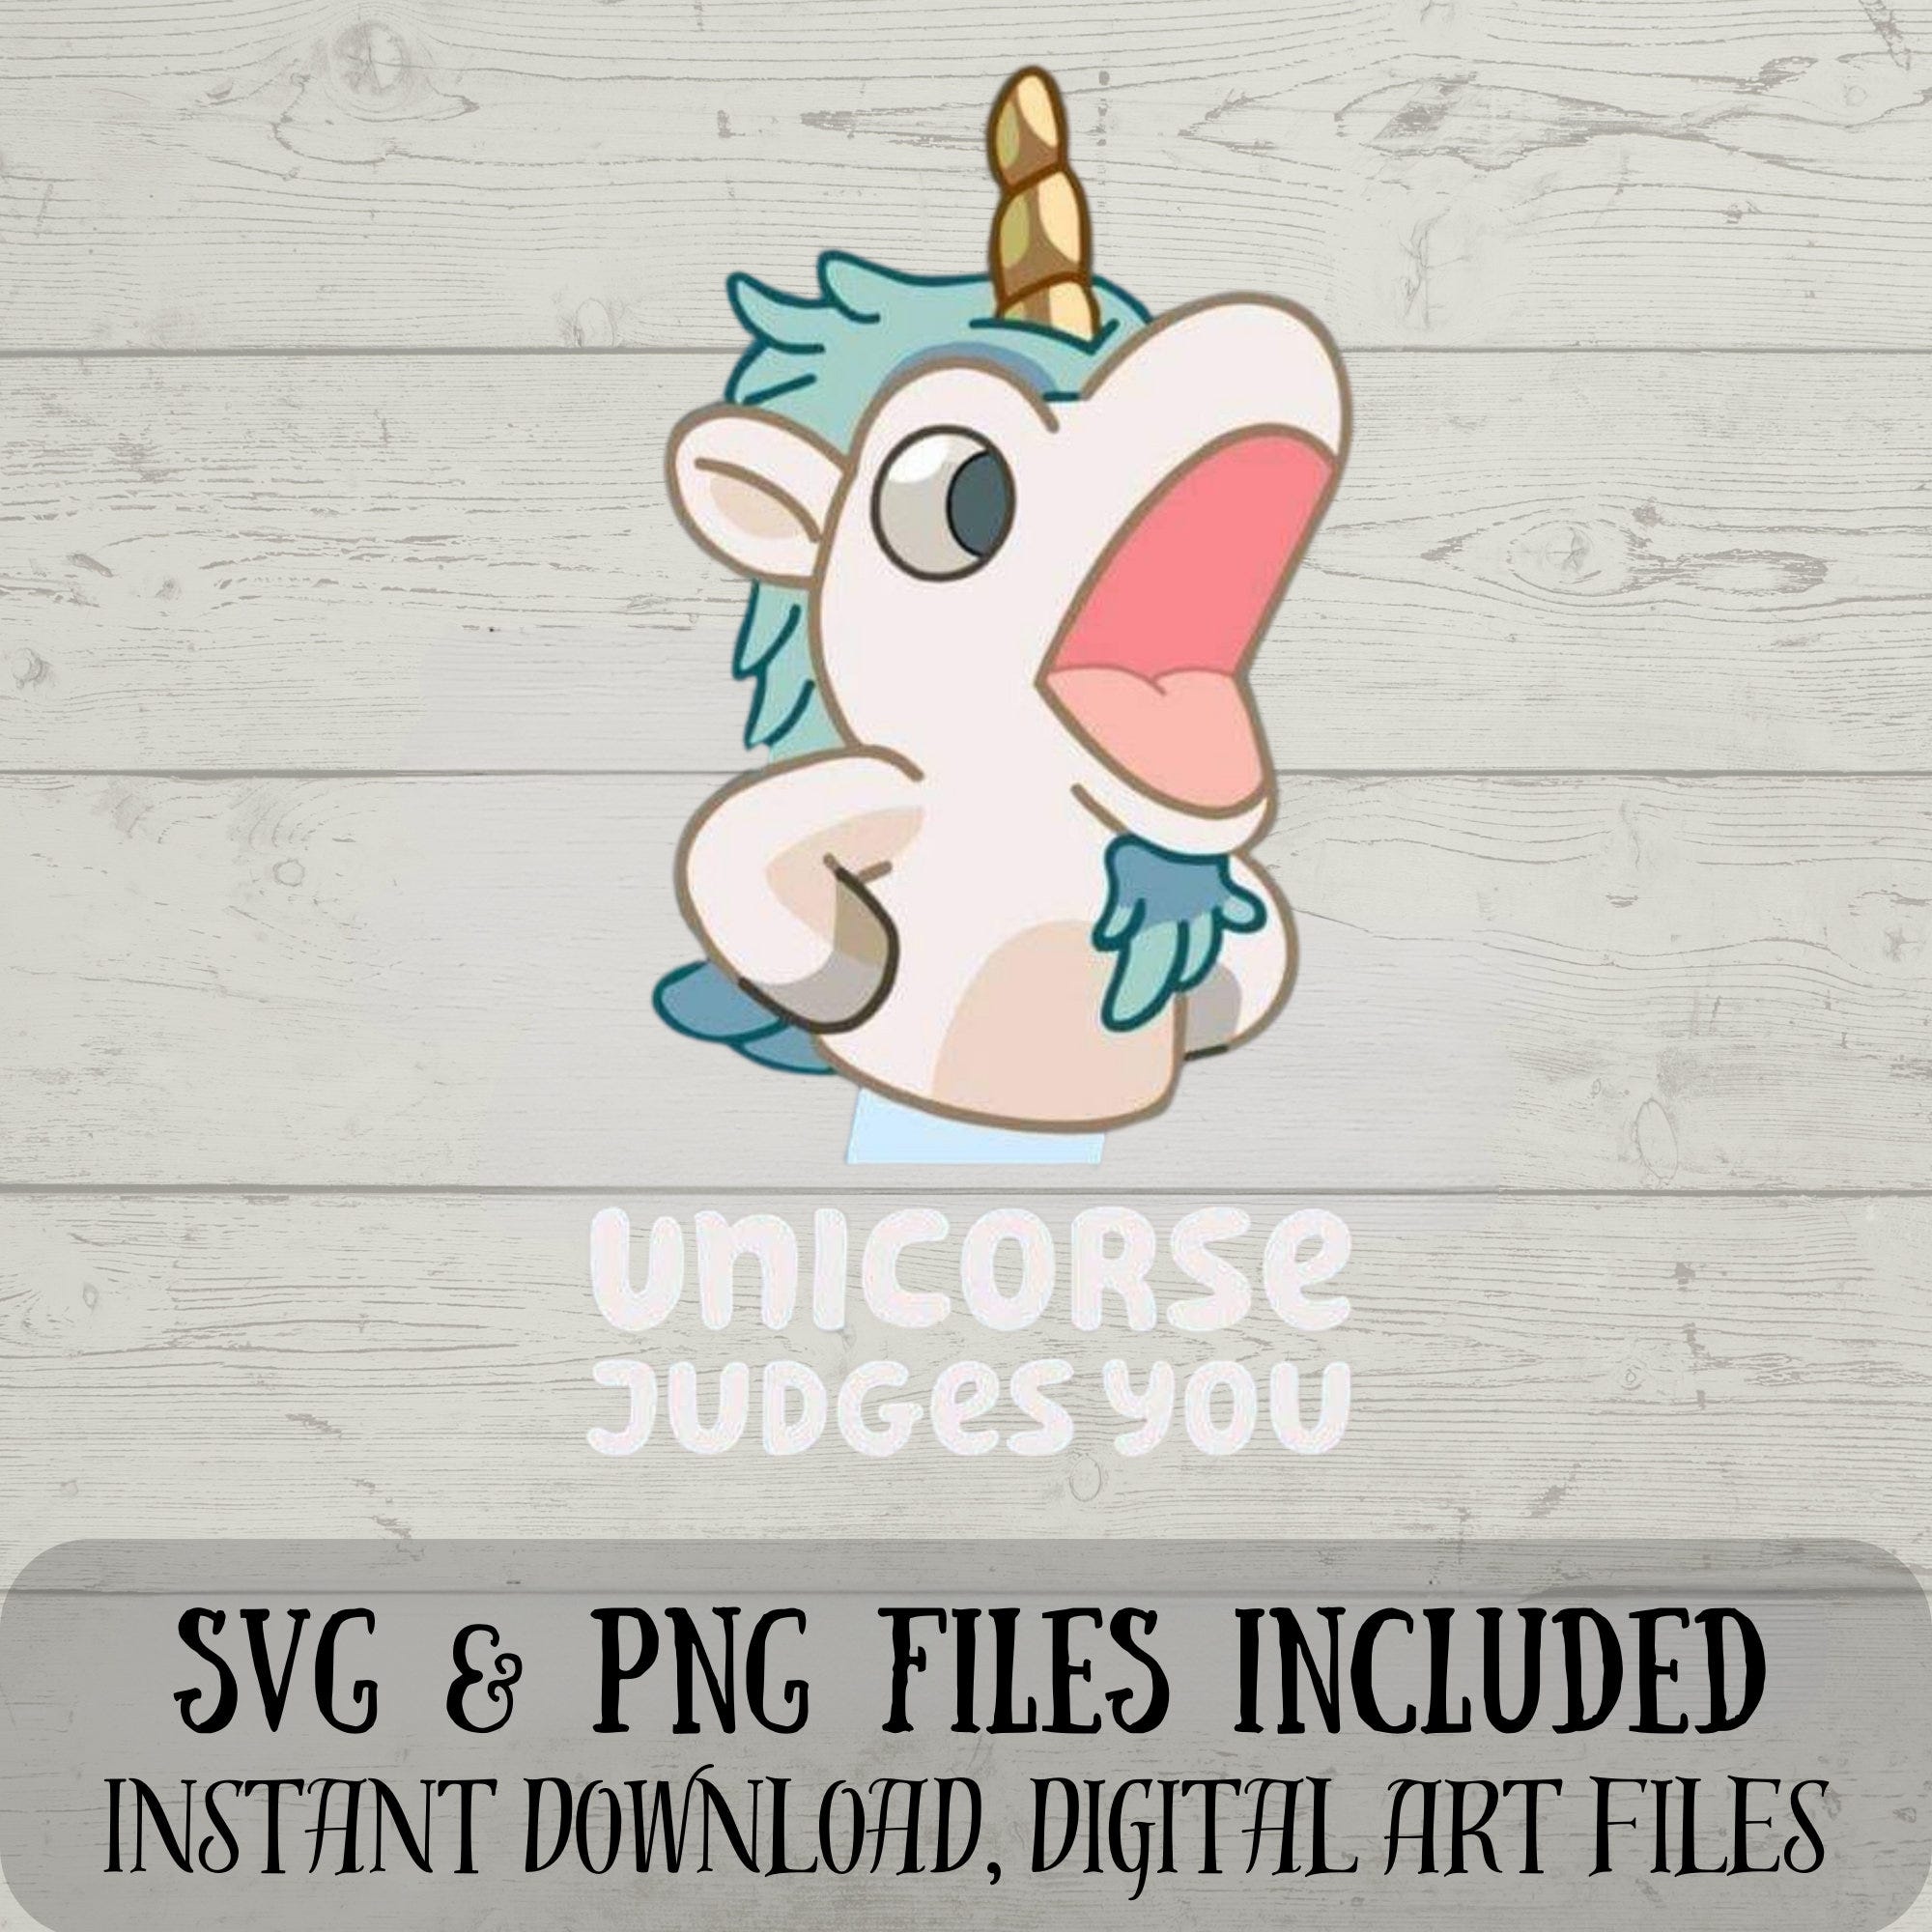 Unicorse SVG - Unicorse Judges you SVG - Bluey SVG - Digital Downlaod - Fun Crafting - Funny Unicorse Moments - svg and png included